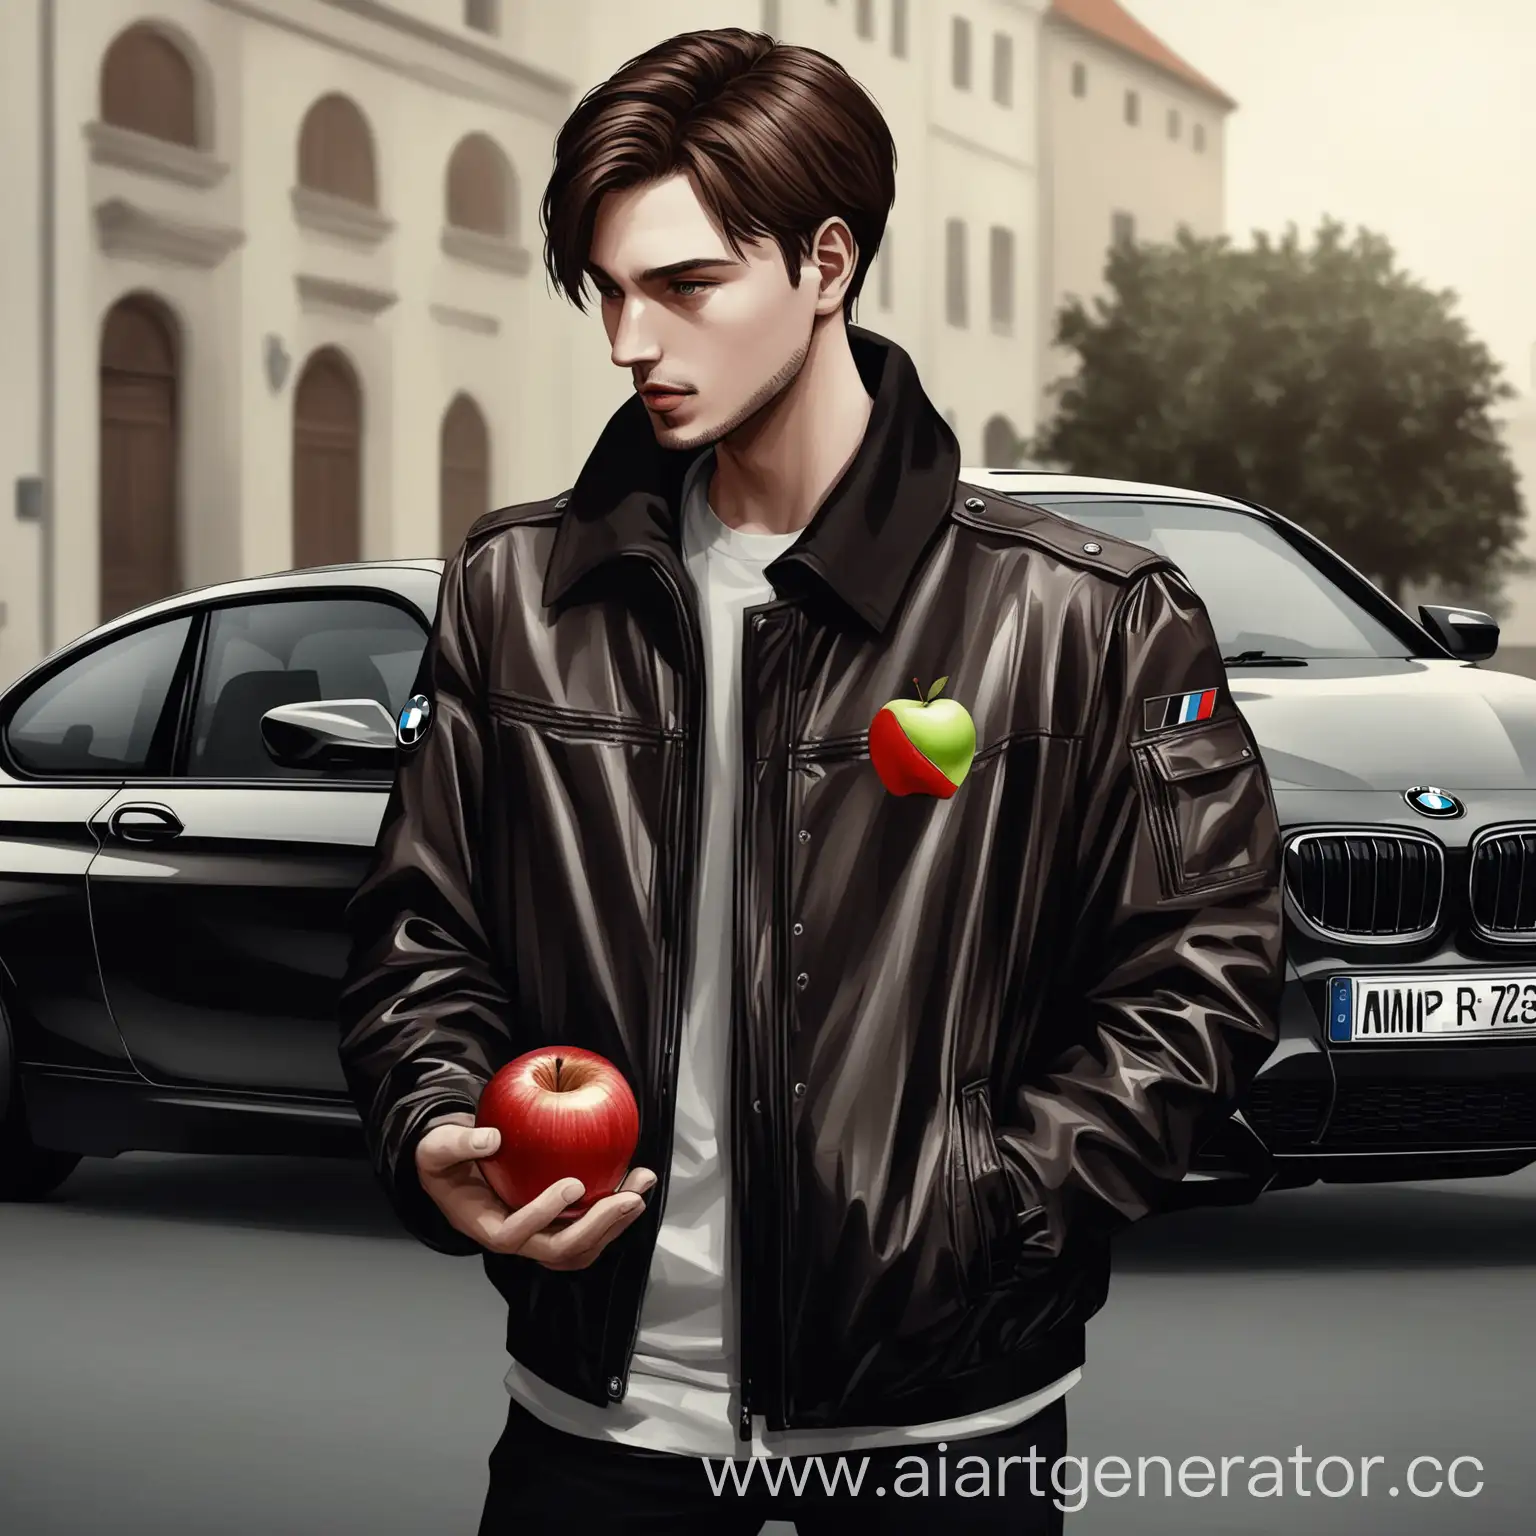 The guy with brown hair is wearing a black BMW jacket and an apple on the jacket